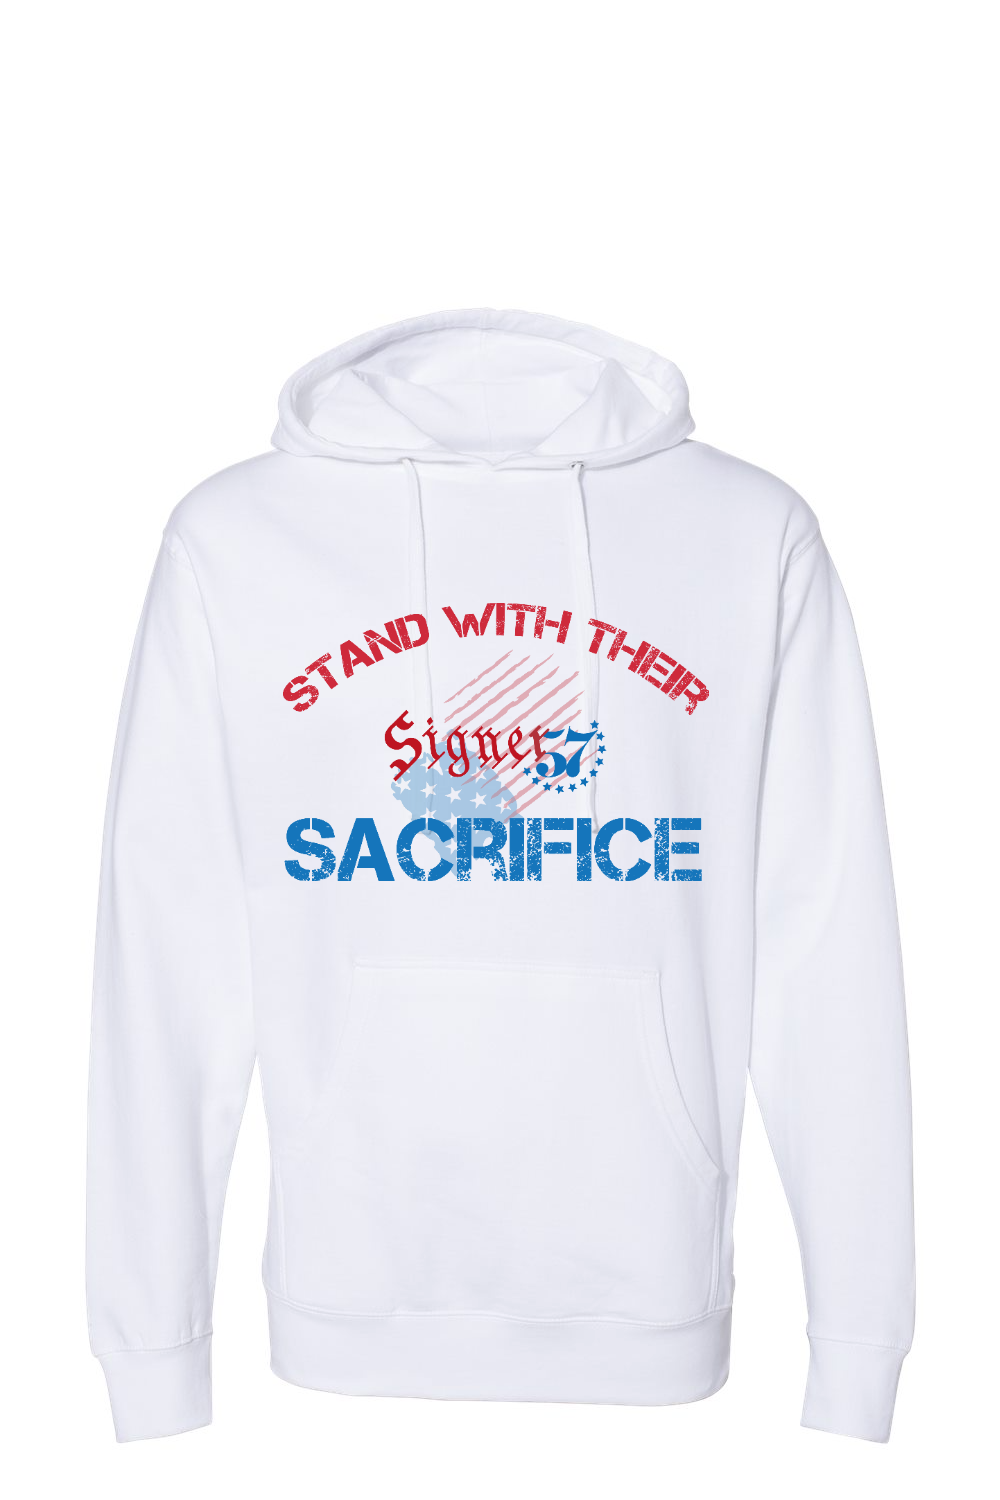 UNISEX Hoodie - Stand With Their Sacrifice